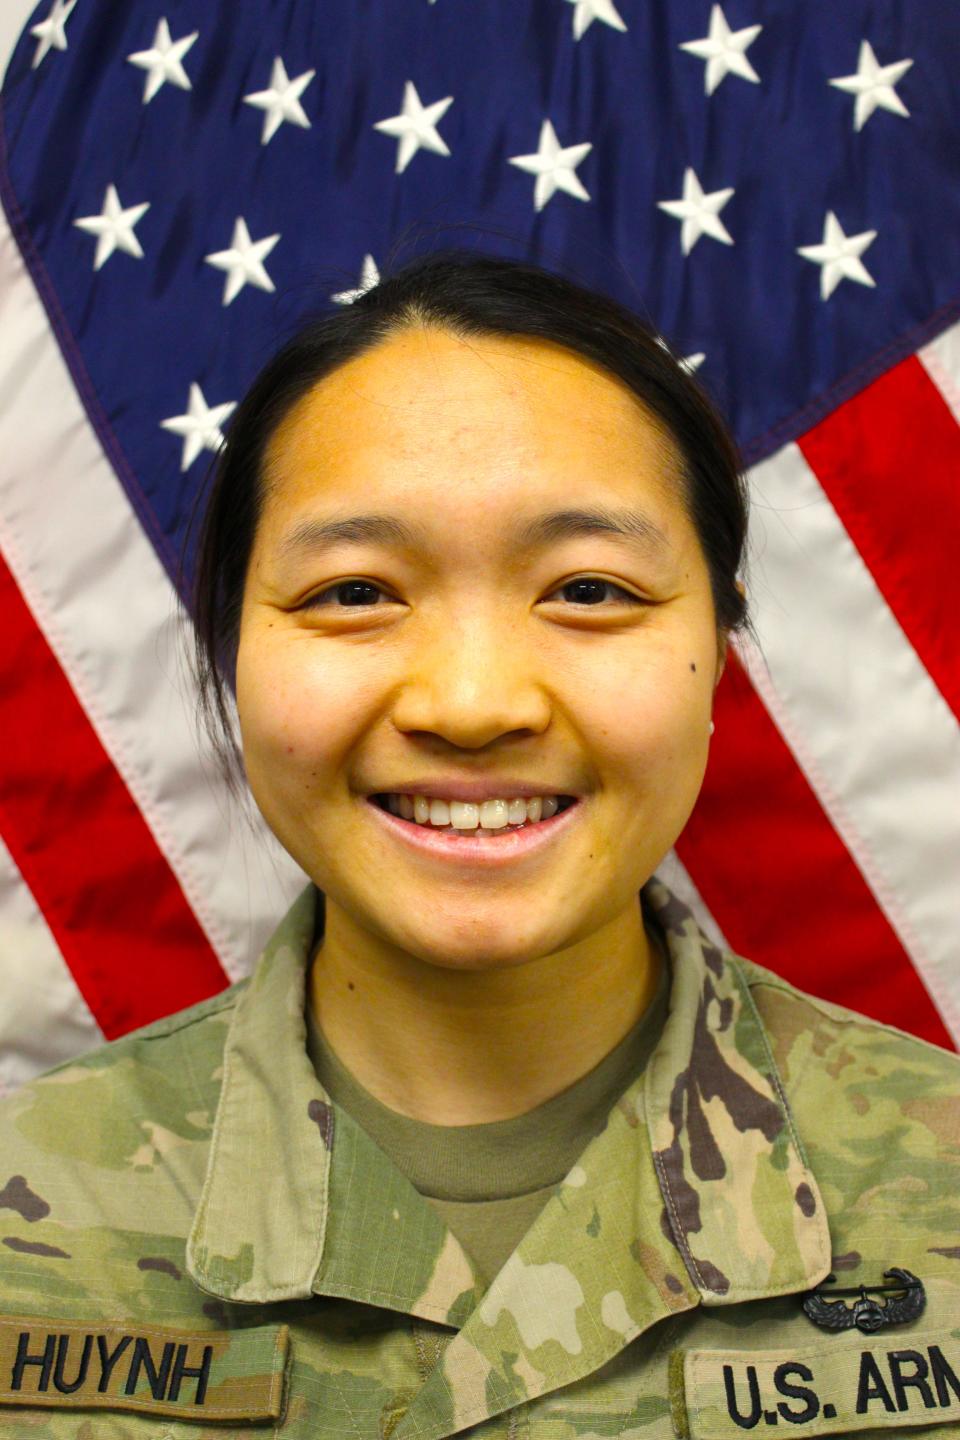 California native Rachel Huynh attends Brown University on an Army ROTC scholarship.